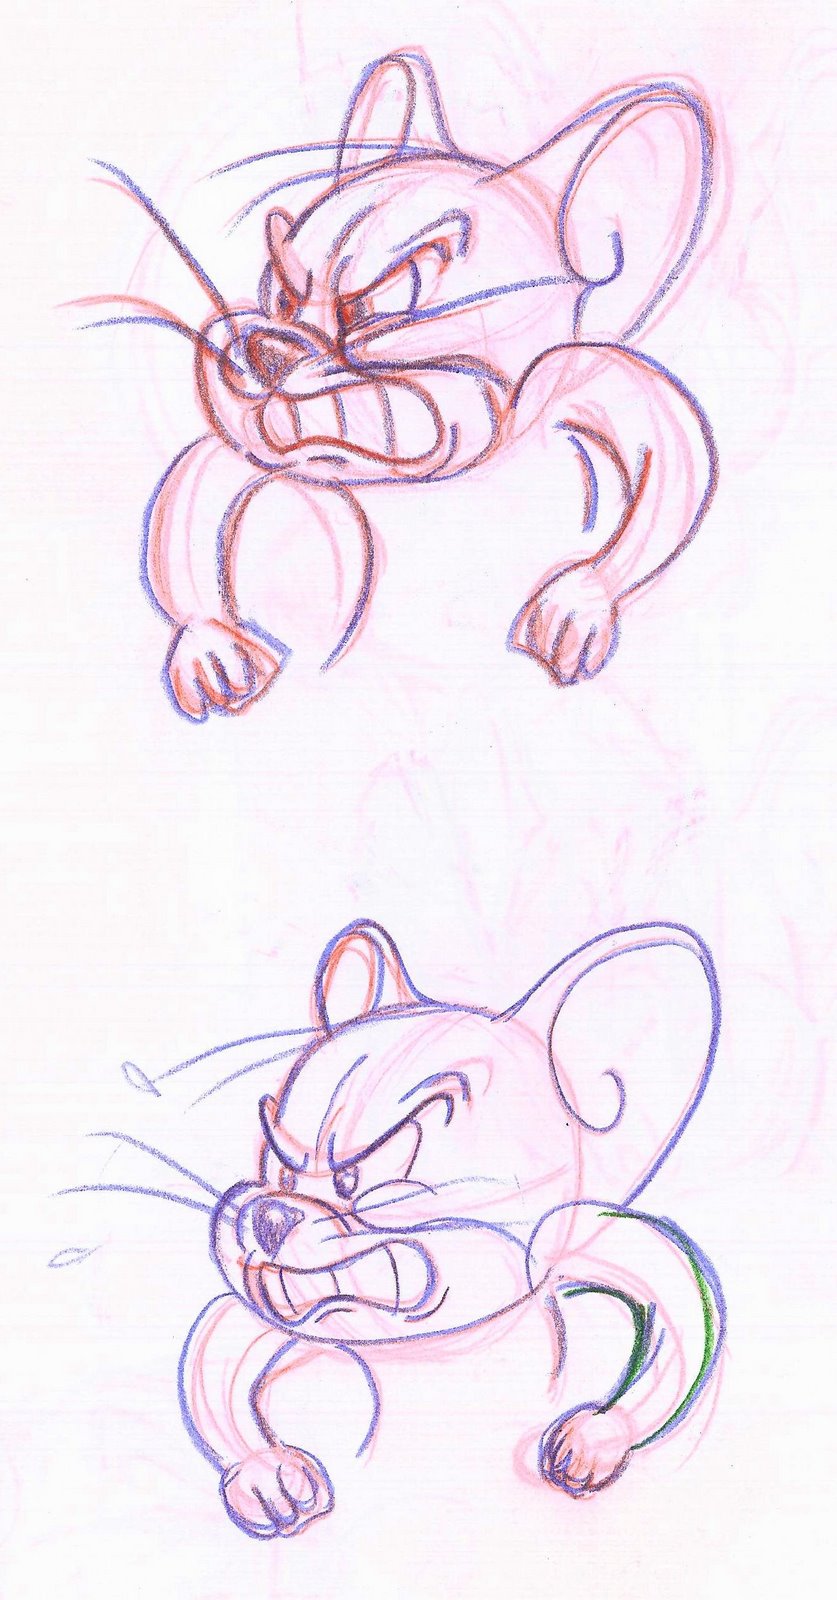 [Jerry+Mouse.jpg]